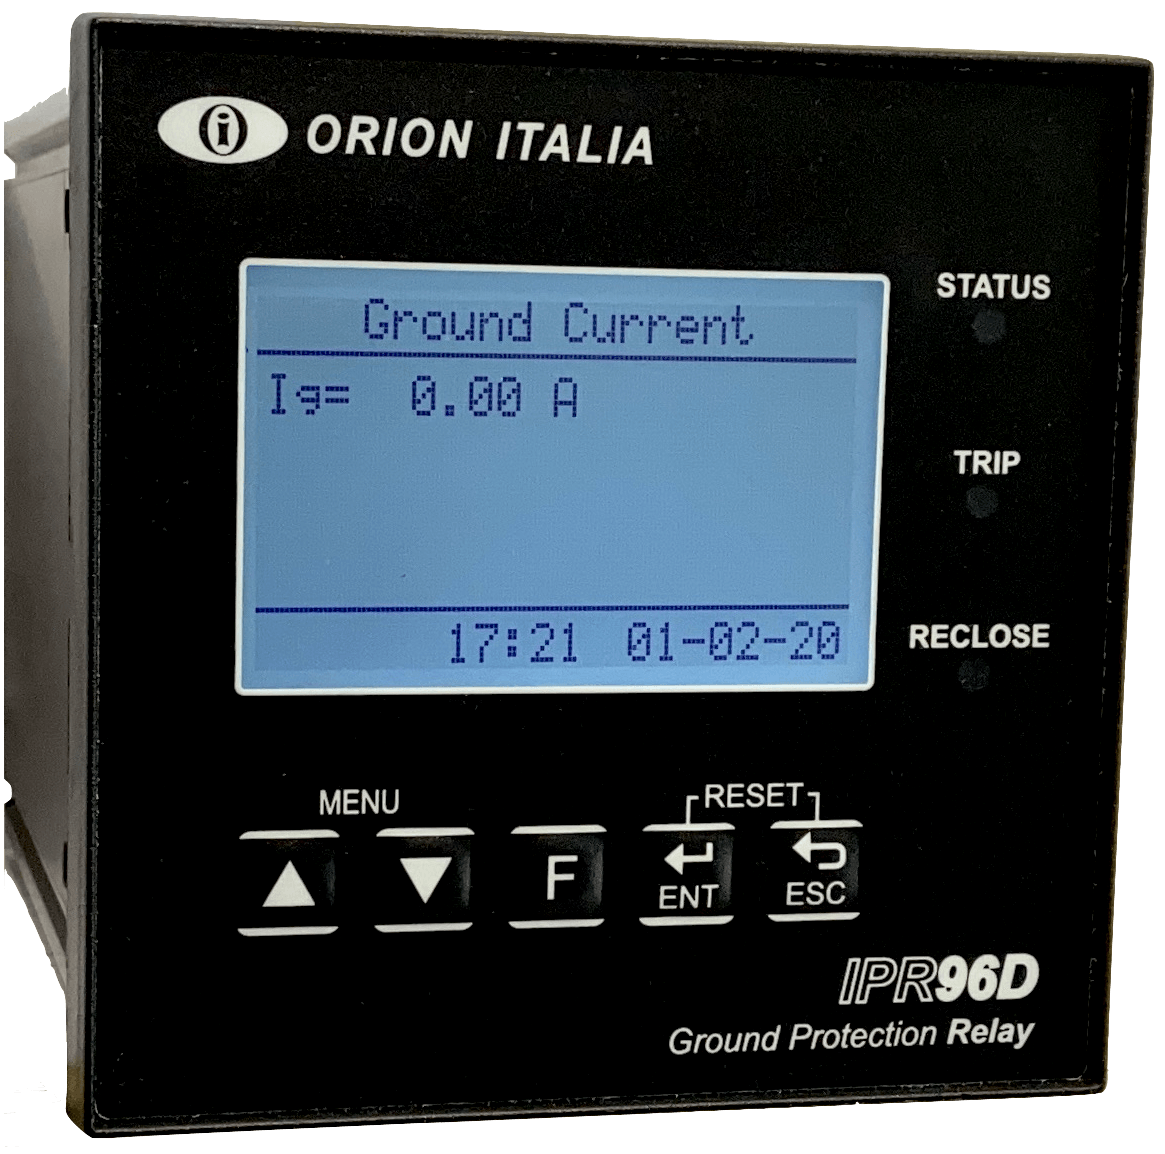 Ground Protection Relay - IPR96D - Orion Italia